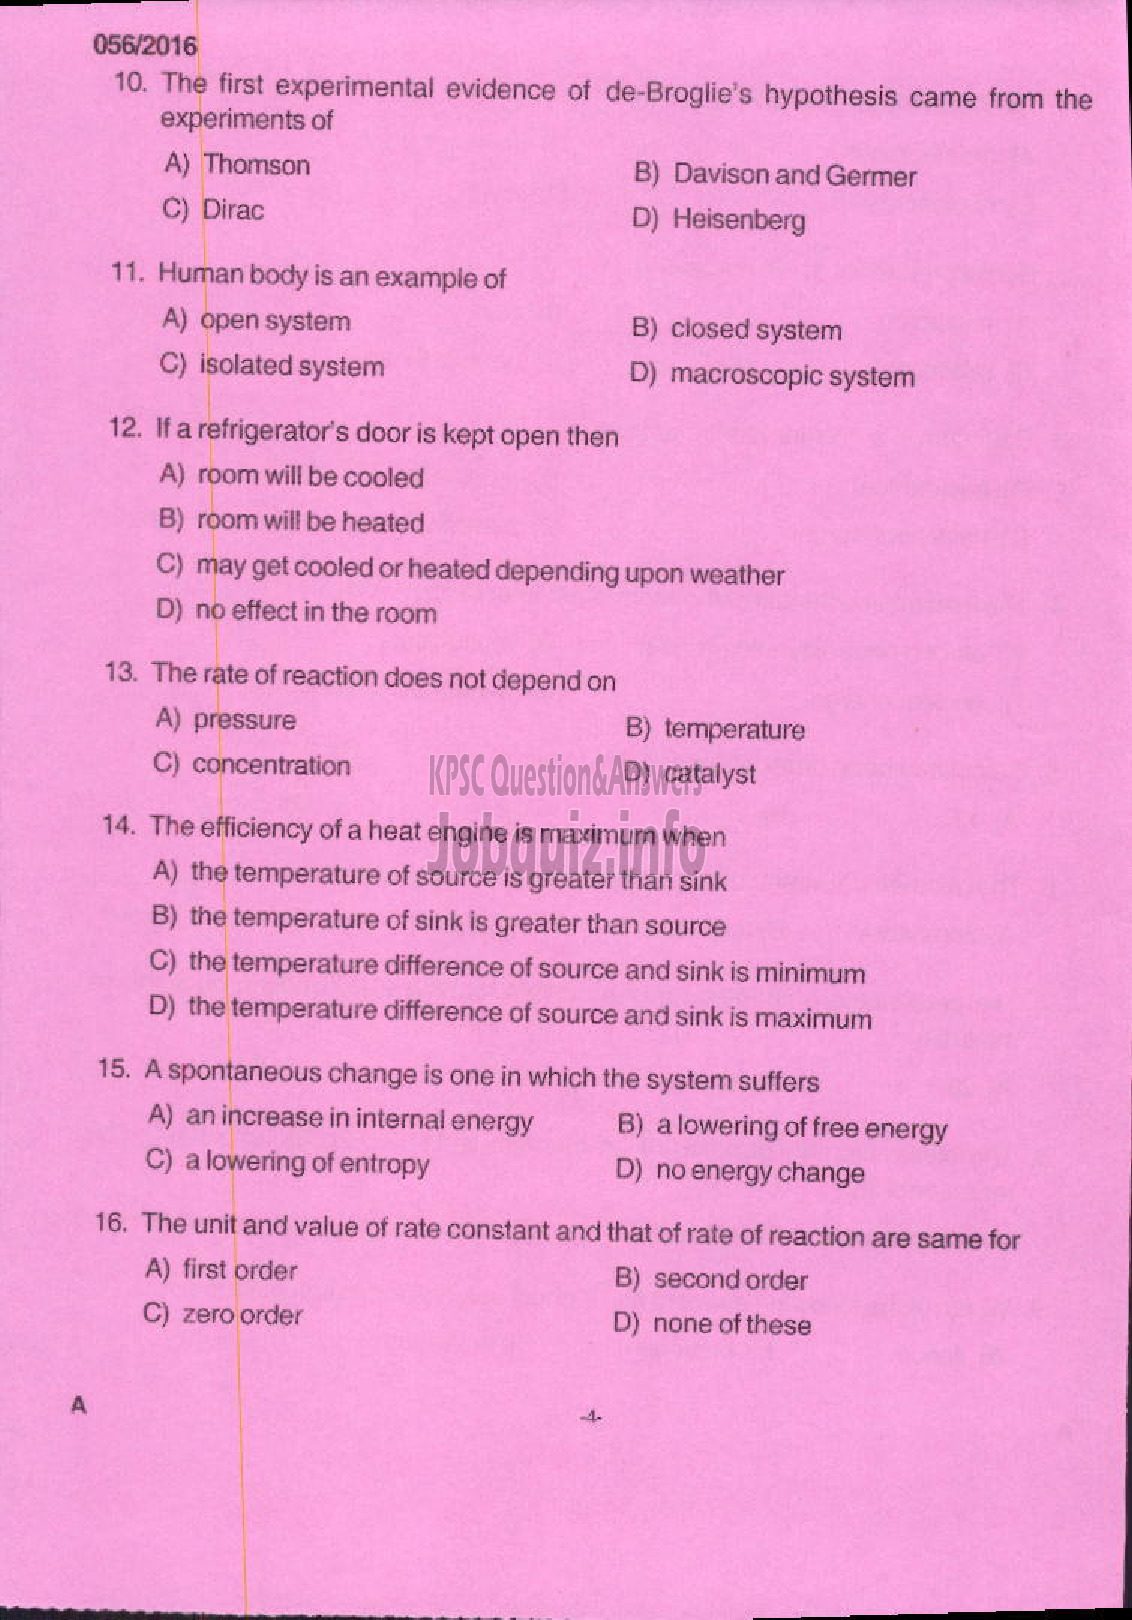 Kerala PSC Question Paper - OTHER RESEARCH ASSISTANT CHEMISTRY FISHERIES-2